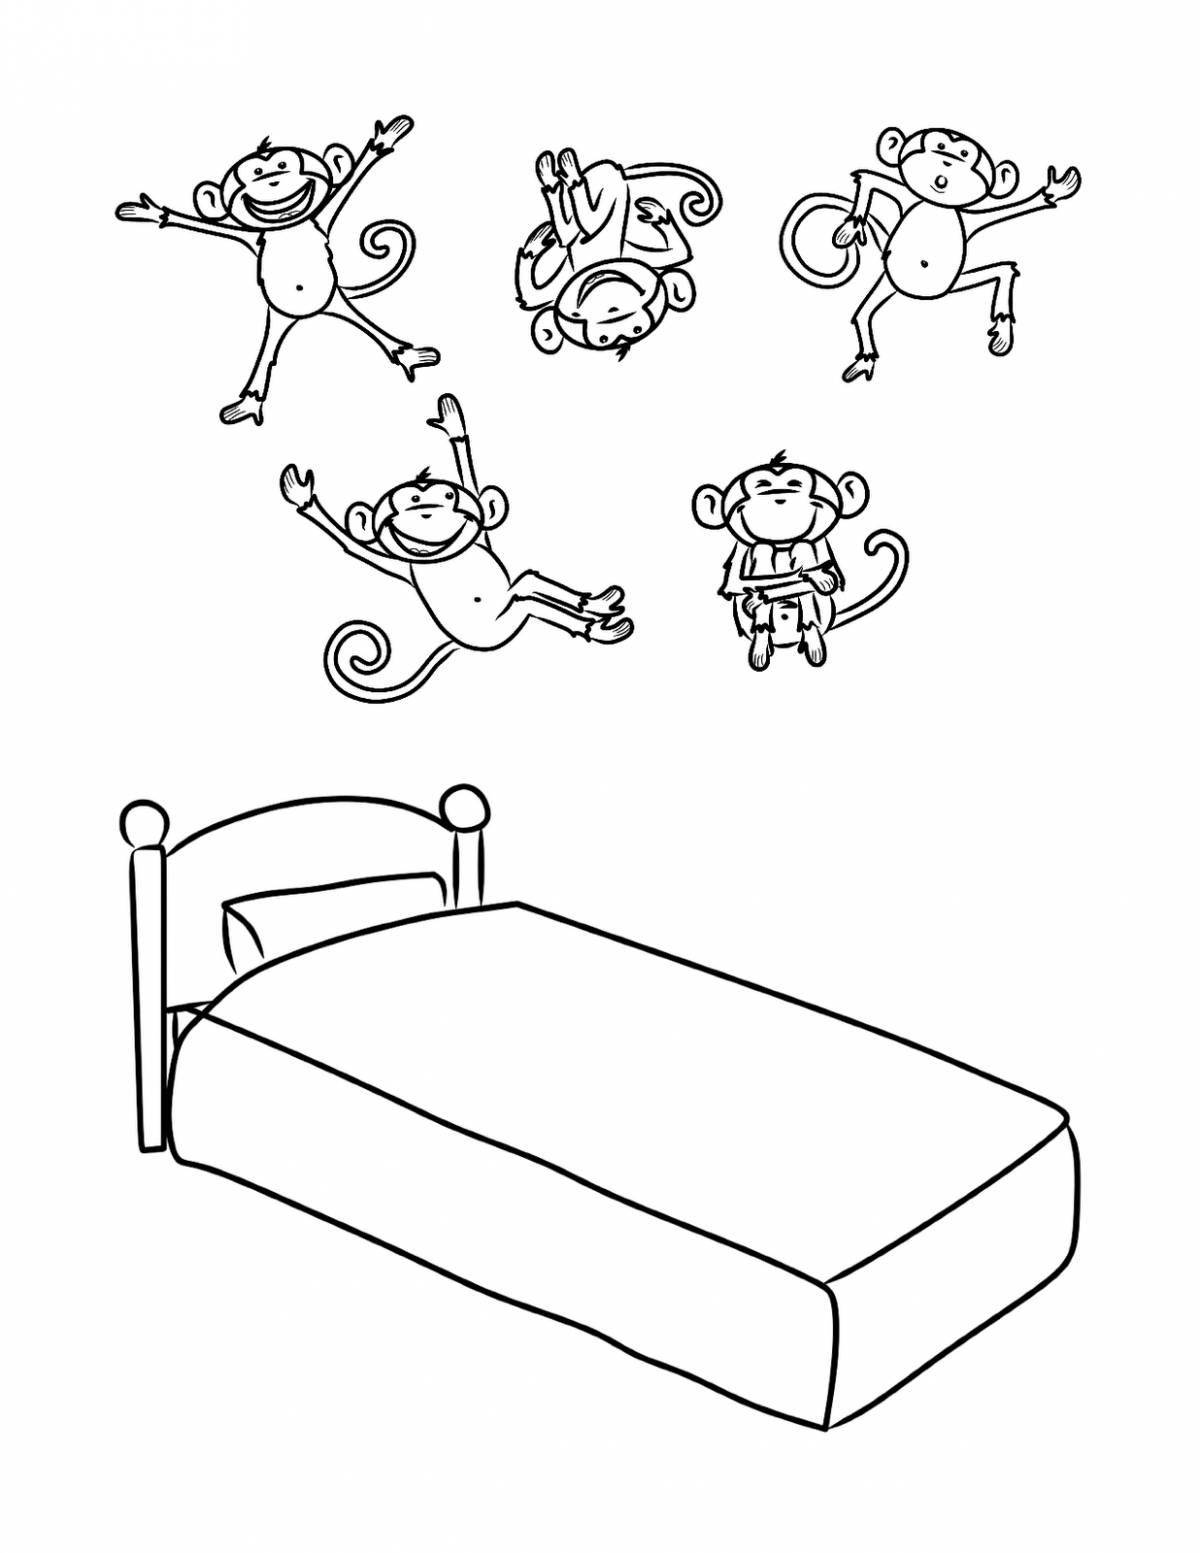 Fun coloring book for baby bed